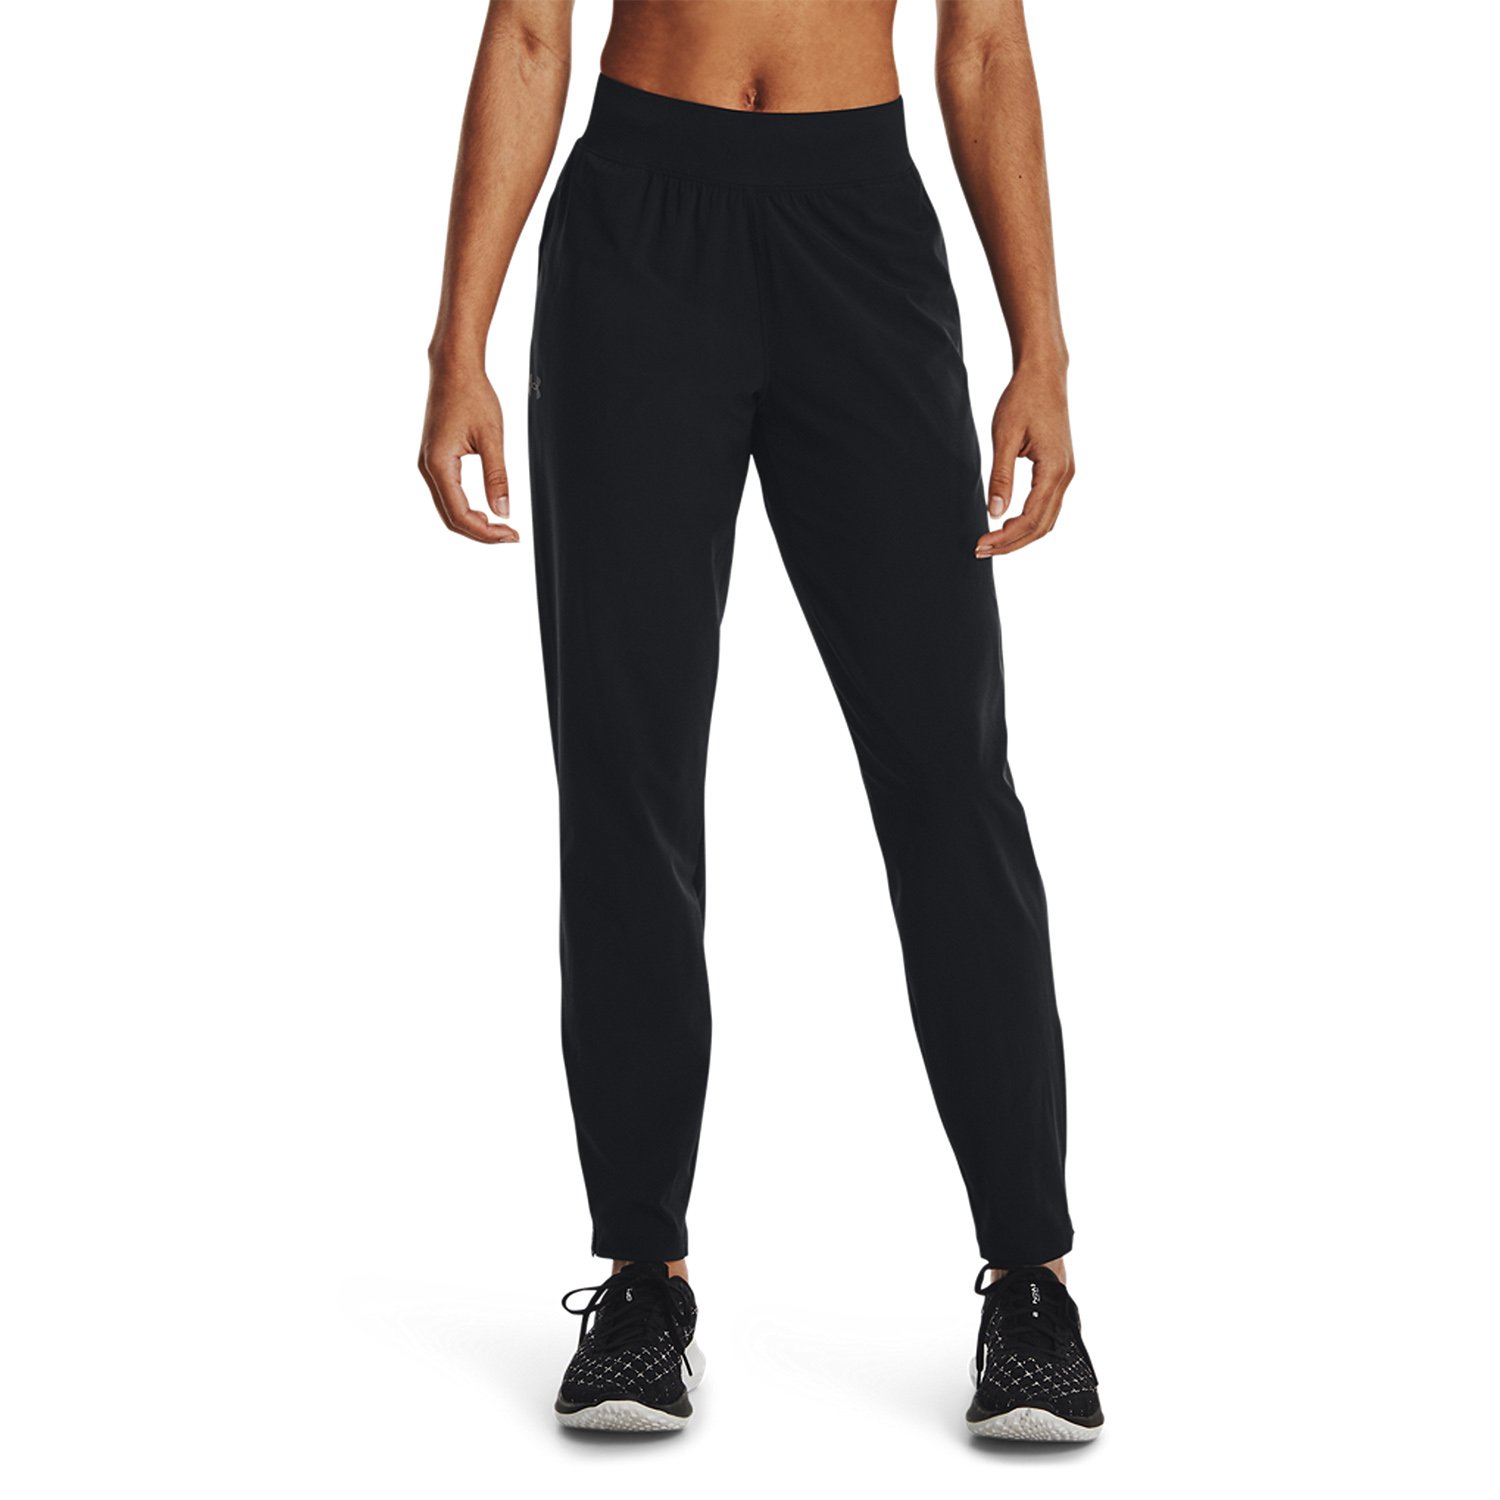 Under Armour Outrun The Storm Women's Running Pants - Black